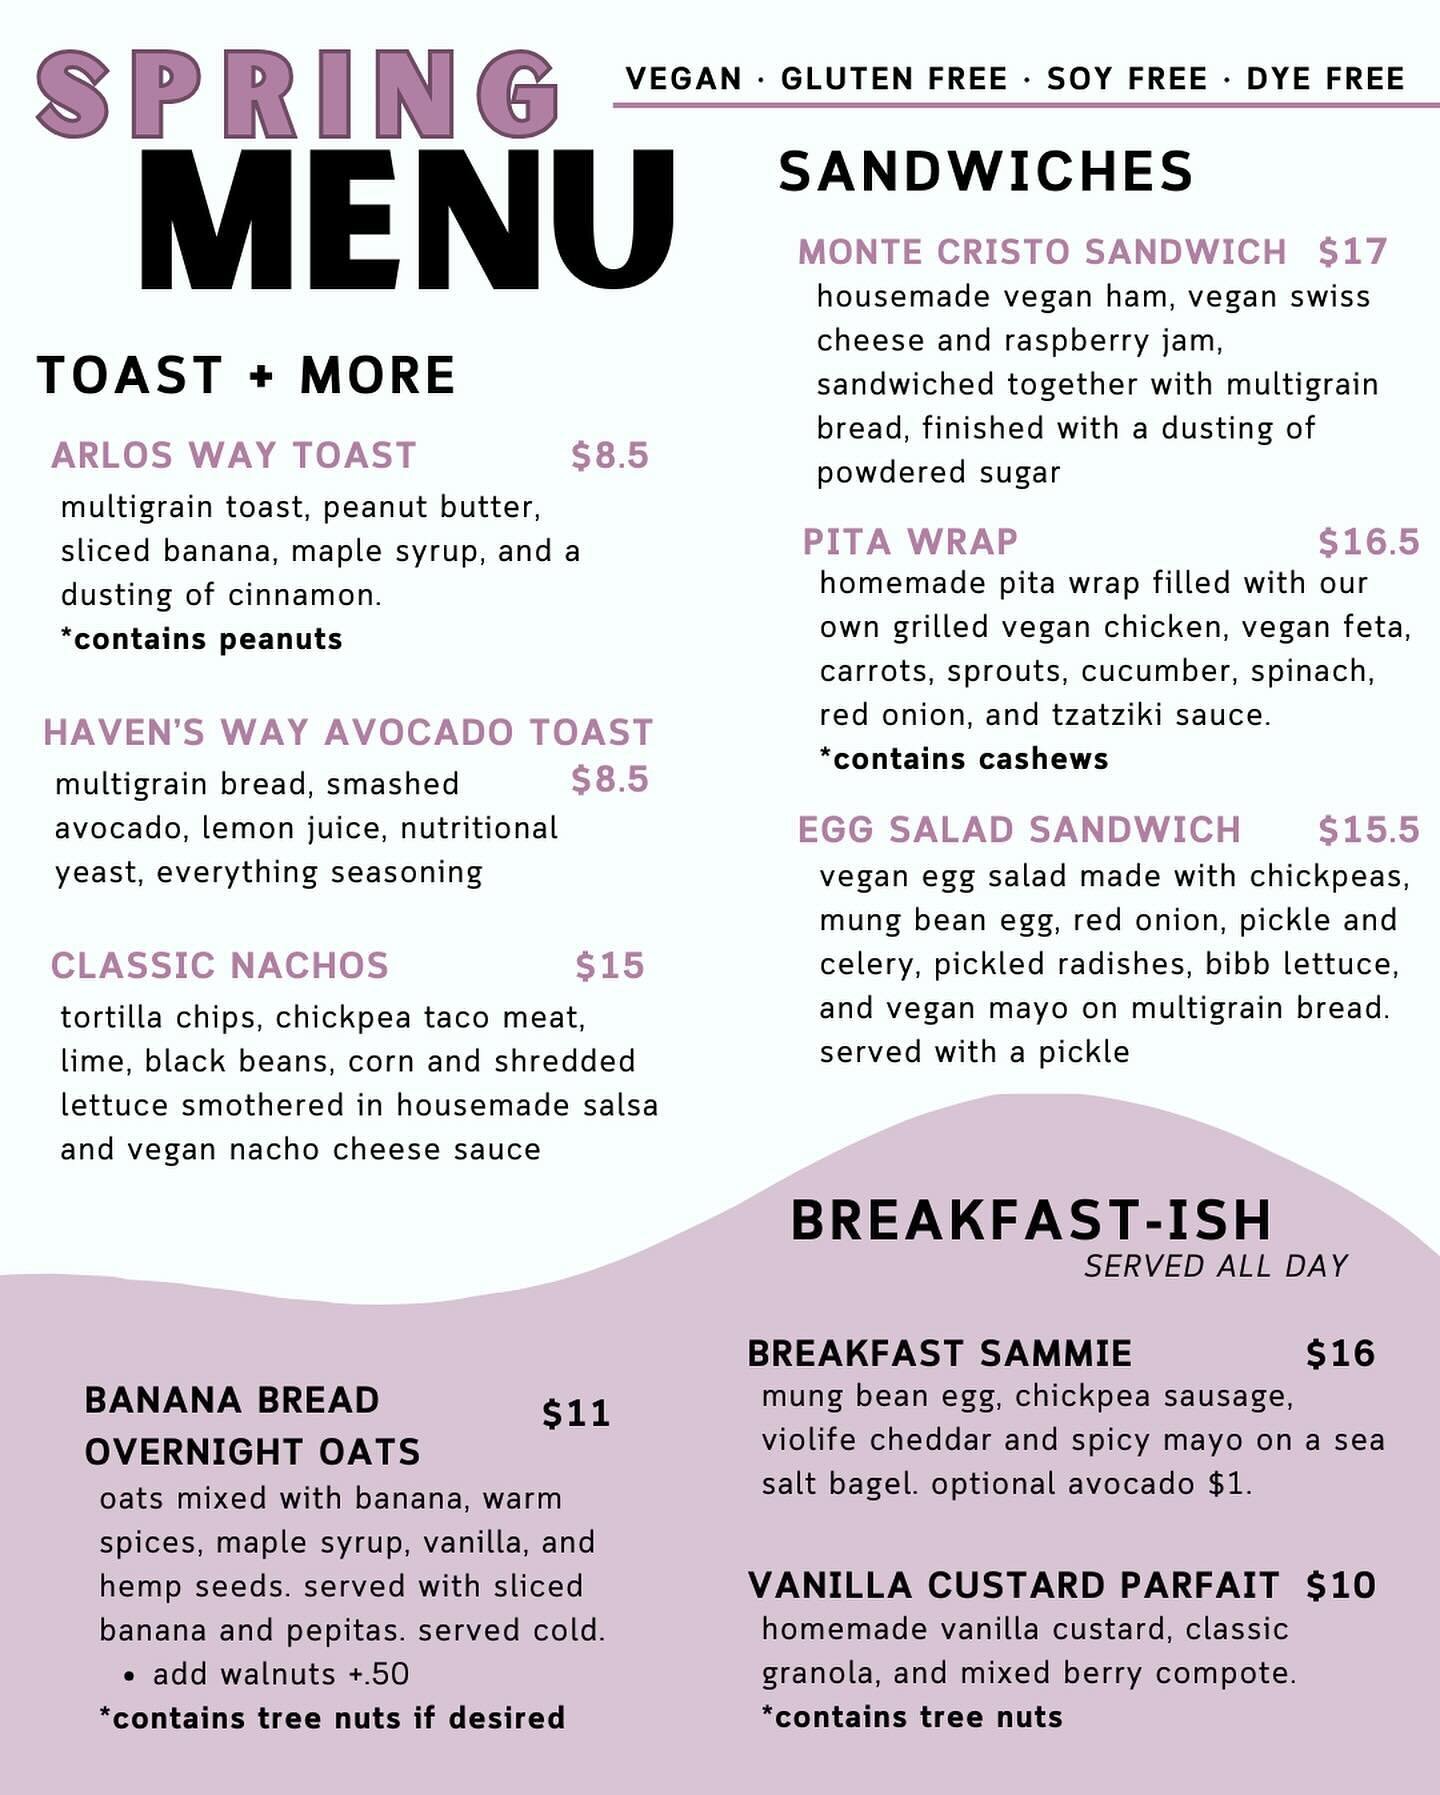 N E W  M E N U

Have you stopped in to try our new spring food menu?
Today&rsquo;s the day, folks!

Sweet, savory, something for everyone. We&rsquo;ve got new items and classics and we&rsquo;re ready to serve you!

Stop in for lunch!